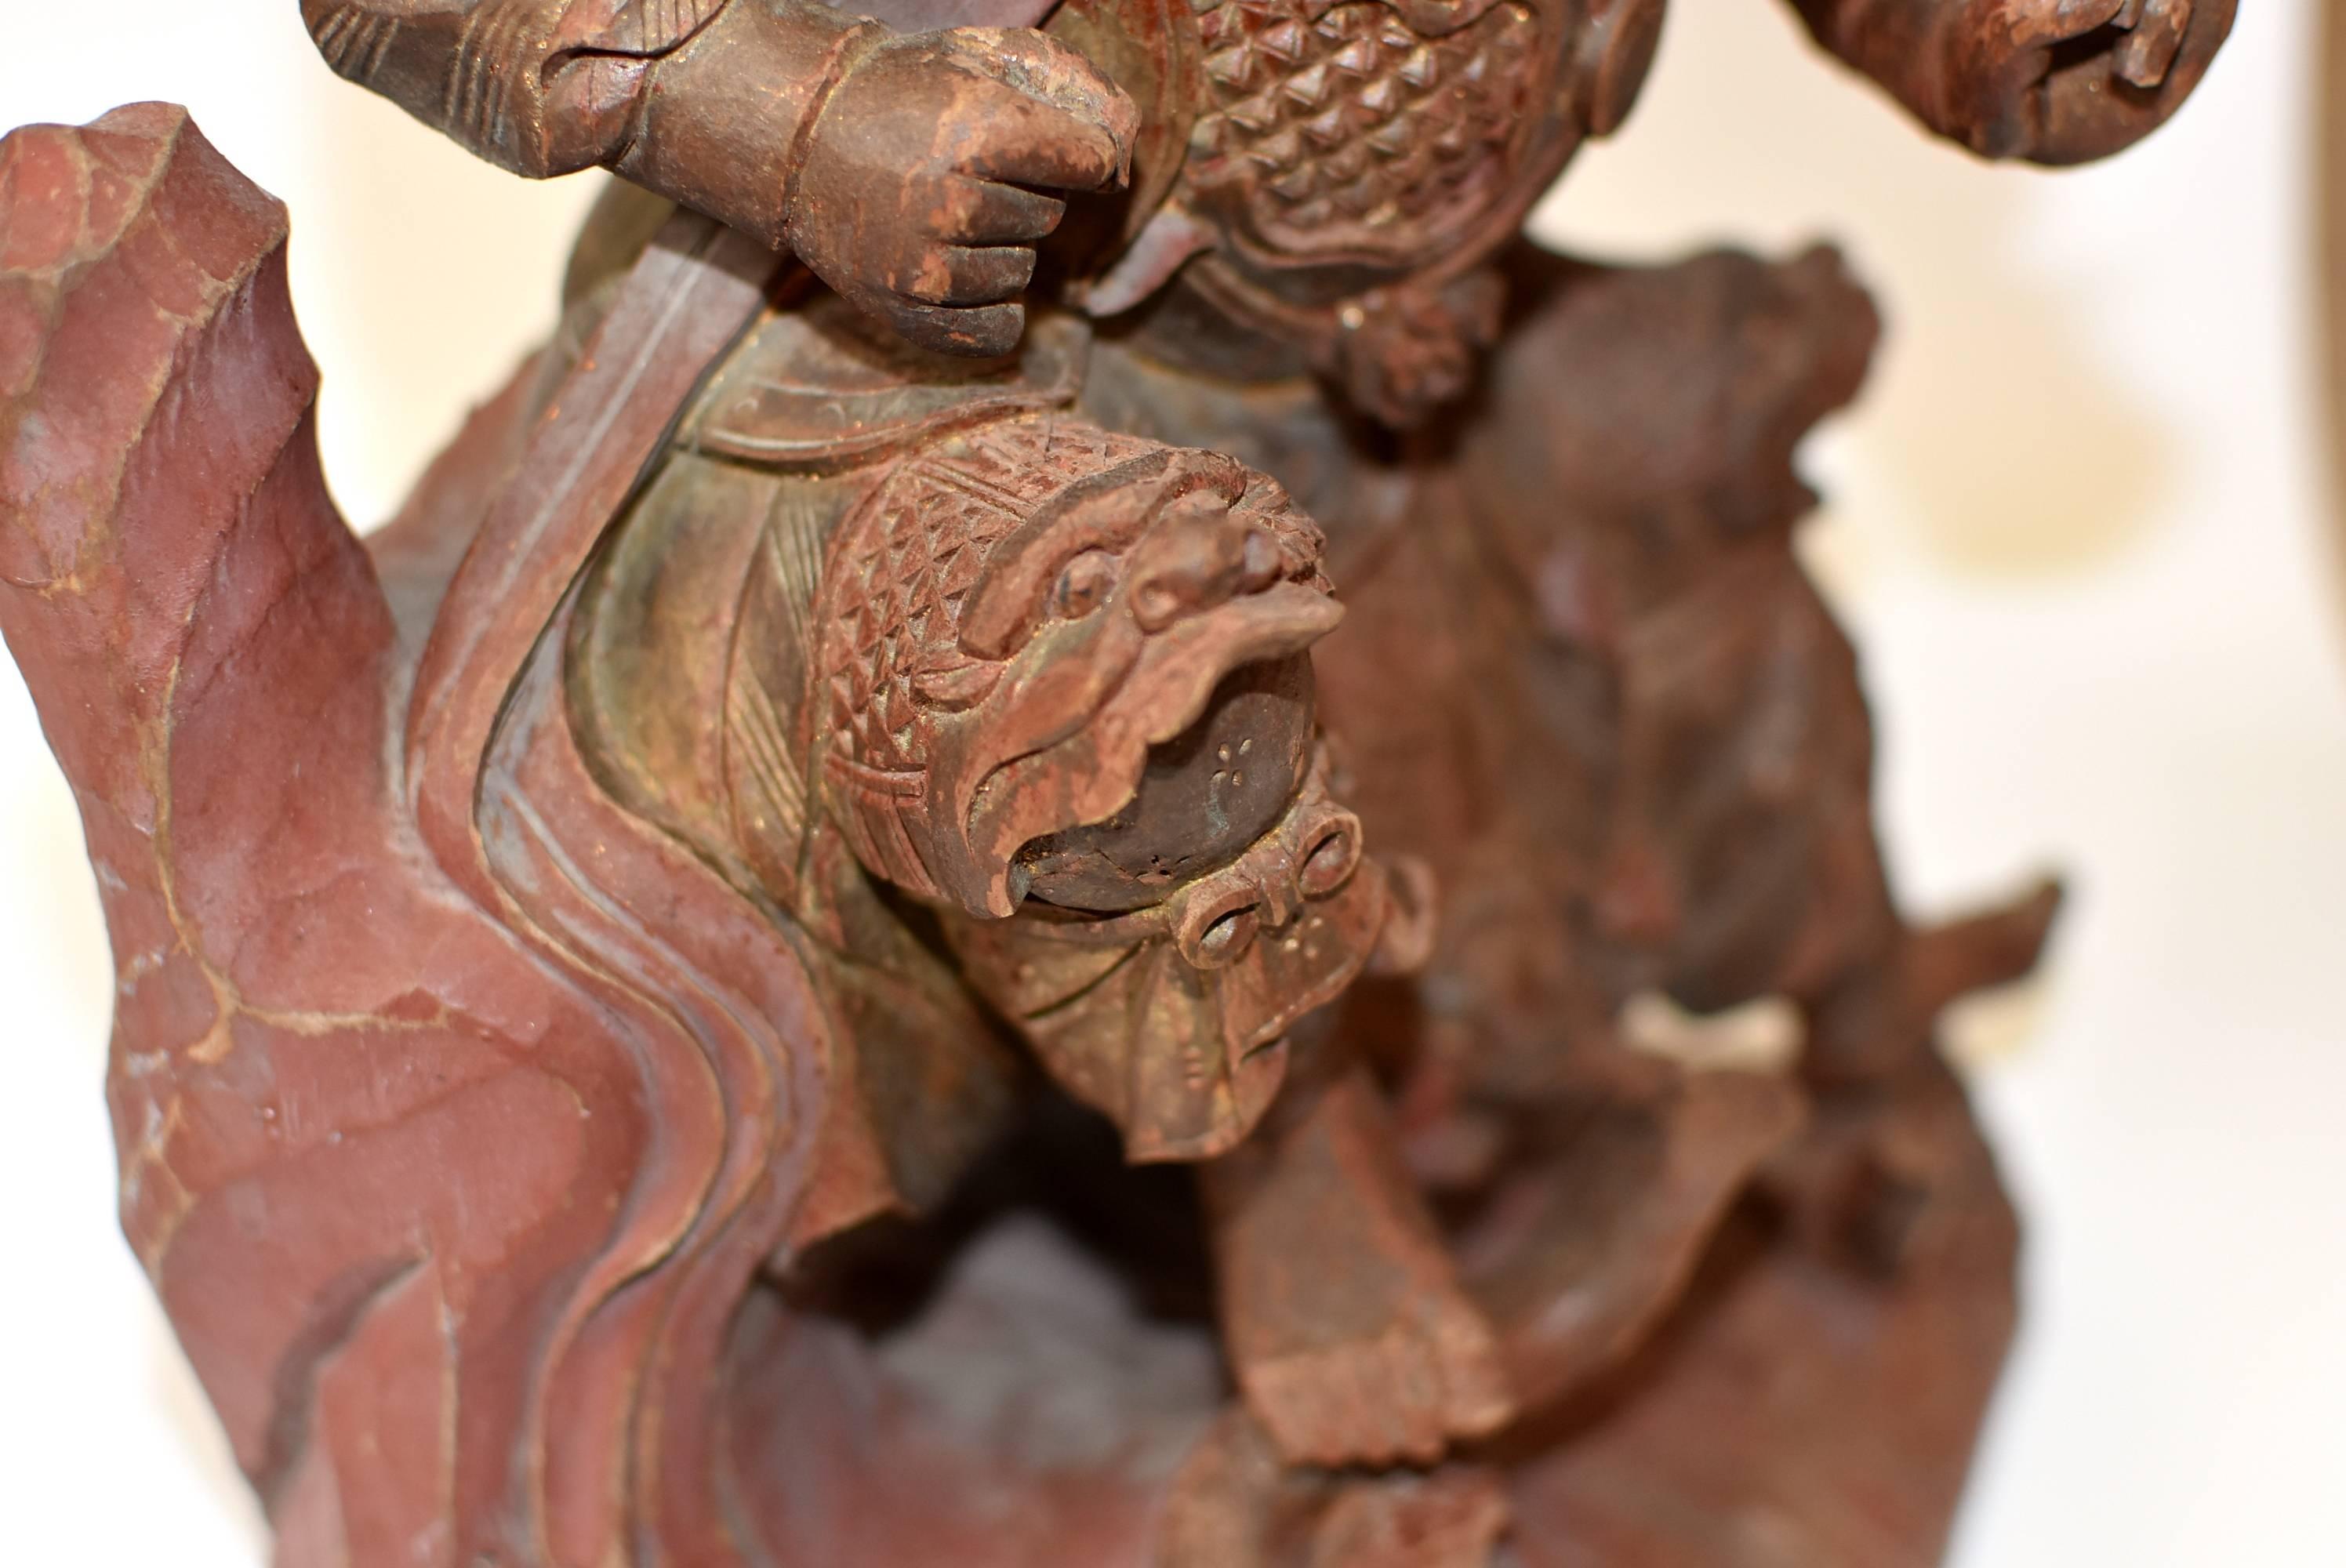 Antique Chinese Heaven General Statue, Carved Wooden Sculpture In Excellent Condition For Sale In Somis, CA